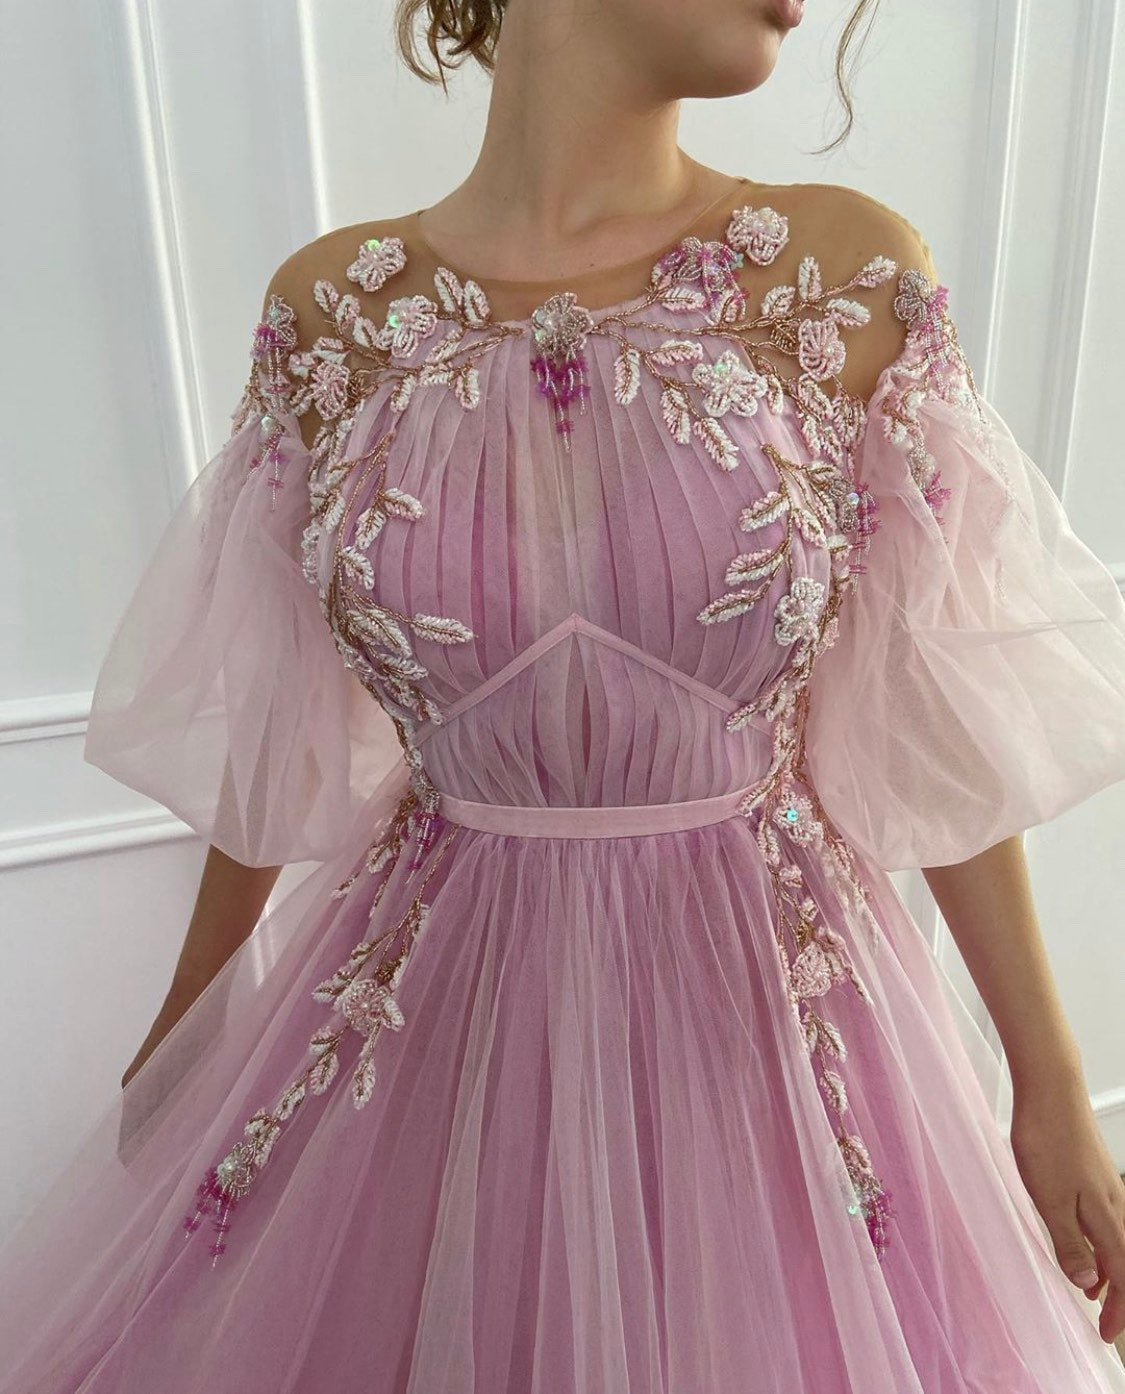 Pink A-Line dress with short sleeves and embroidery